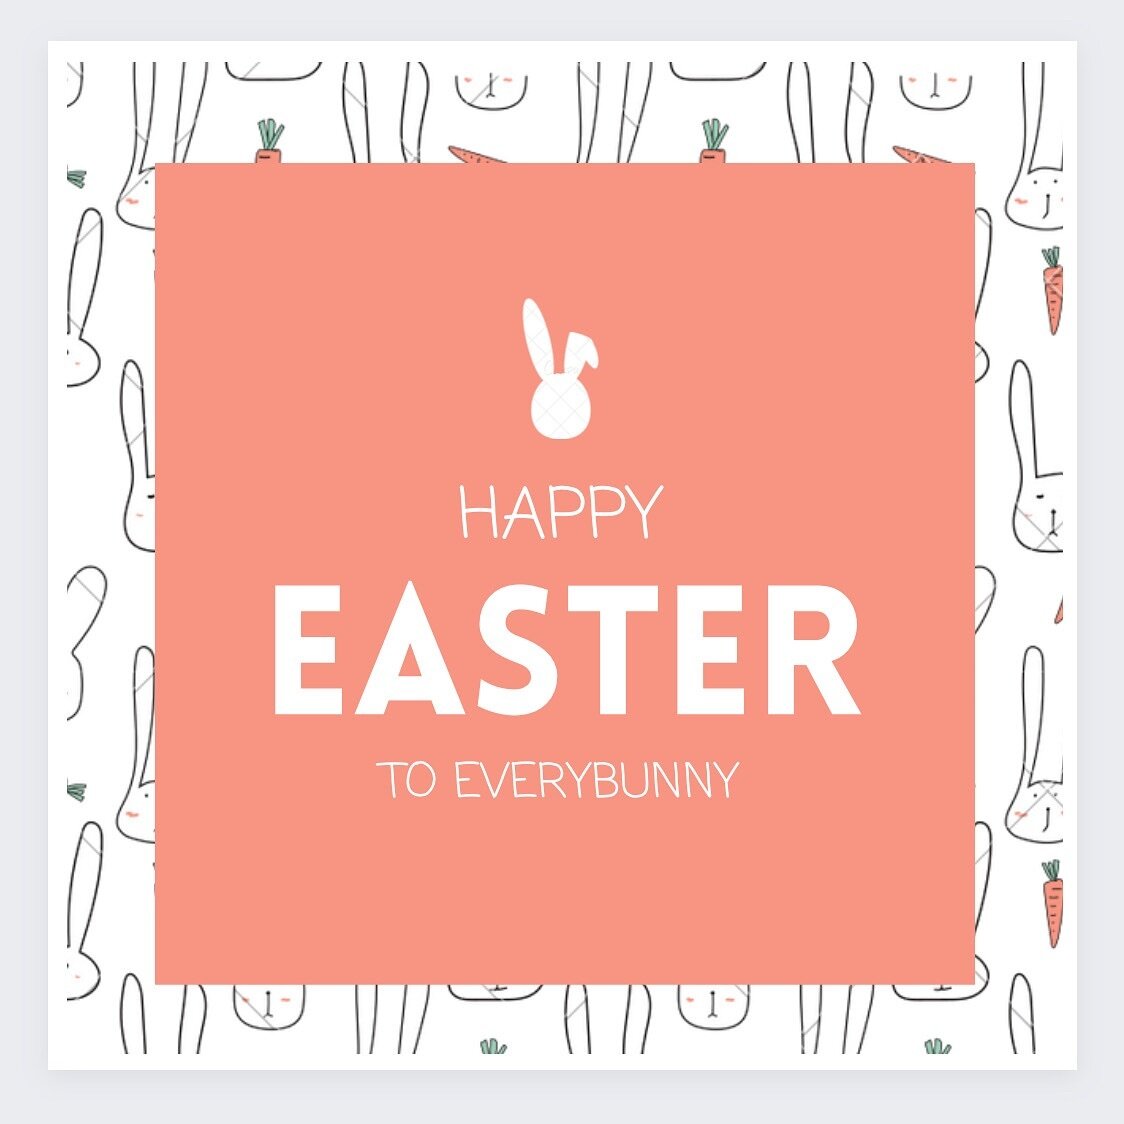 HAPPY EASTER || we hope you are enjoying time with those you love 🐰